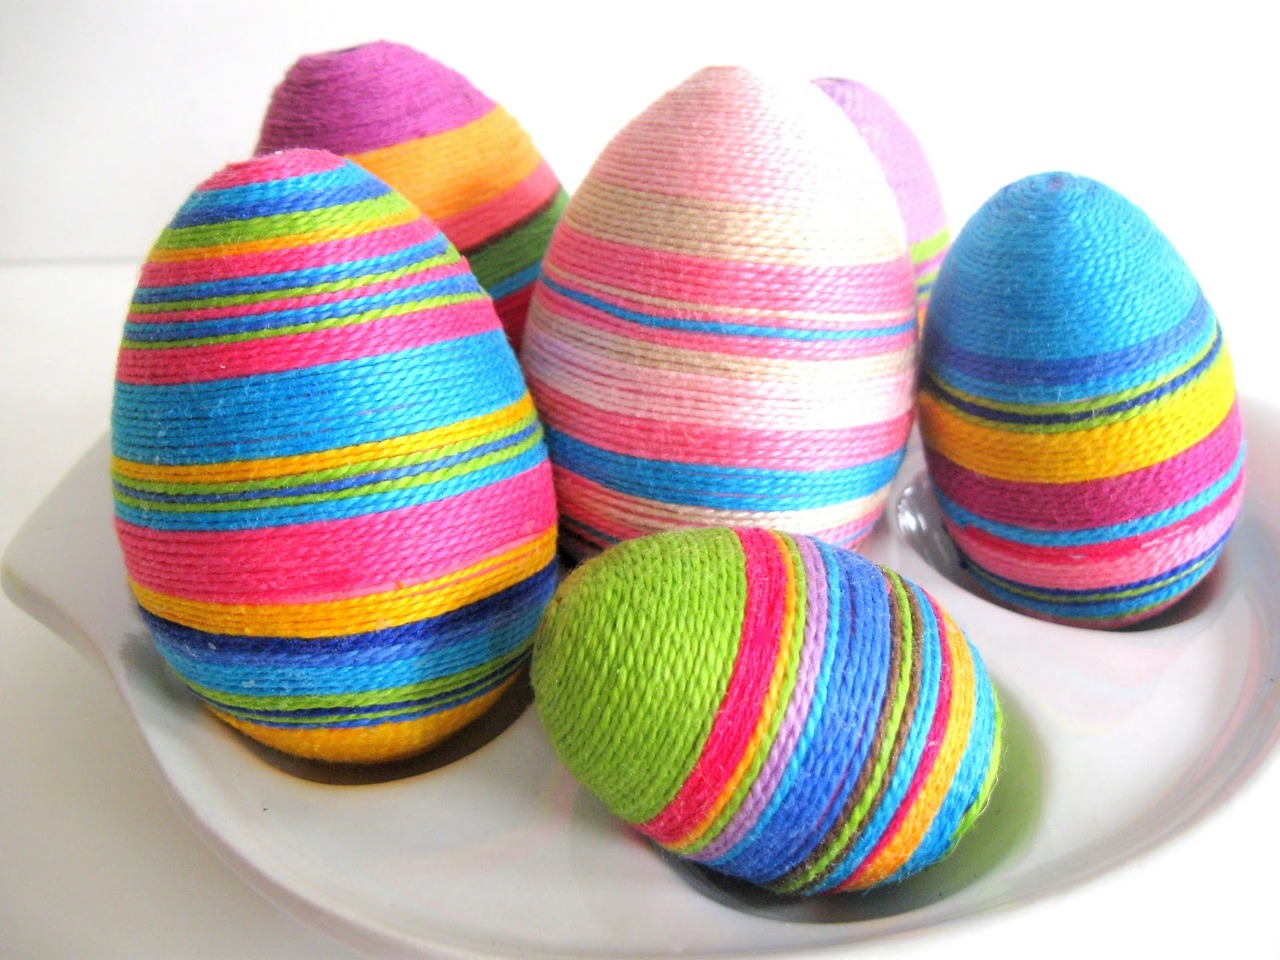 Happy Easter Decoration Colorful Egg HD Wallpapers | Wallpaperloves